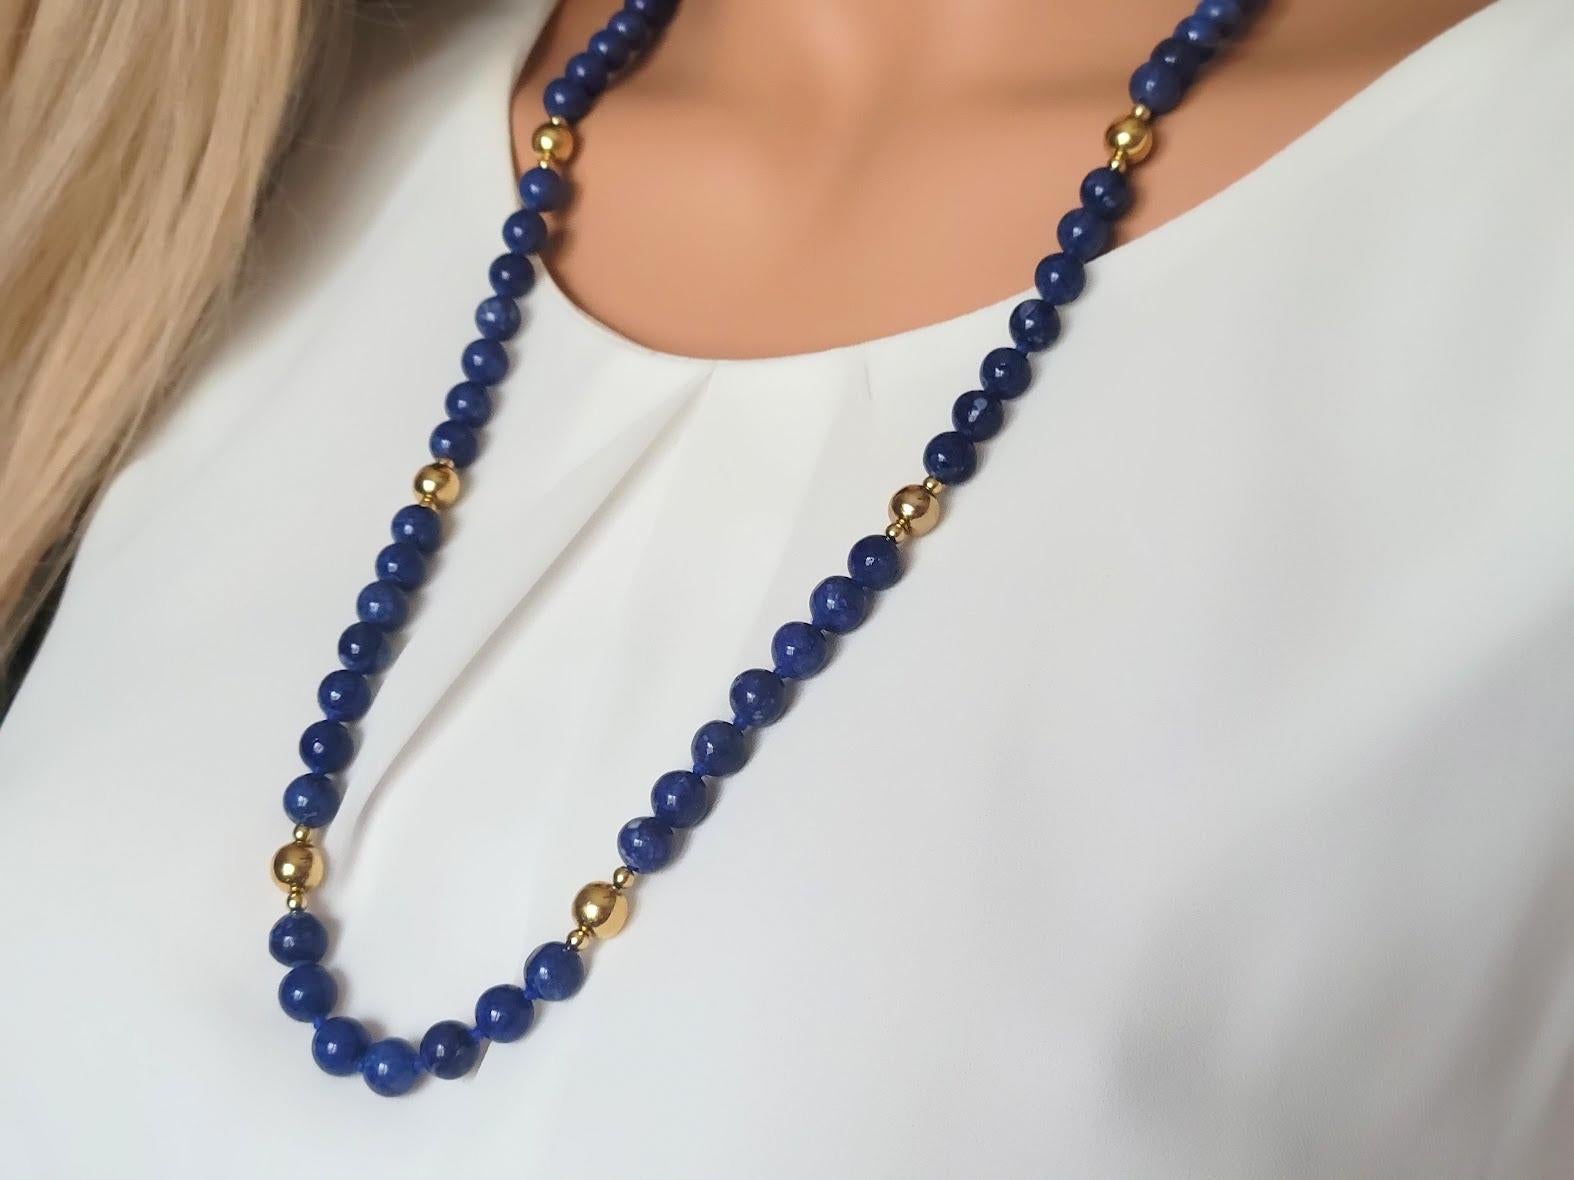 Vintage Sodalite Gold Necklace In Excellent Condition For Sale In Chesterland, OH